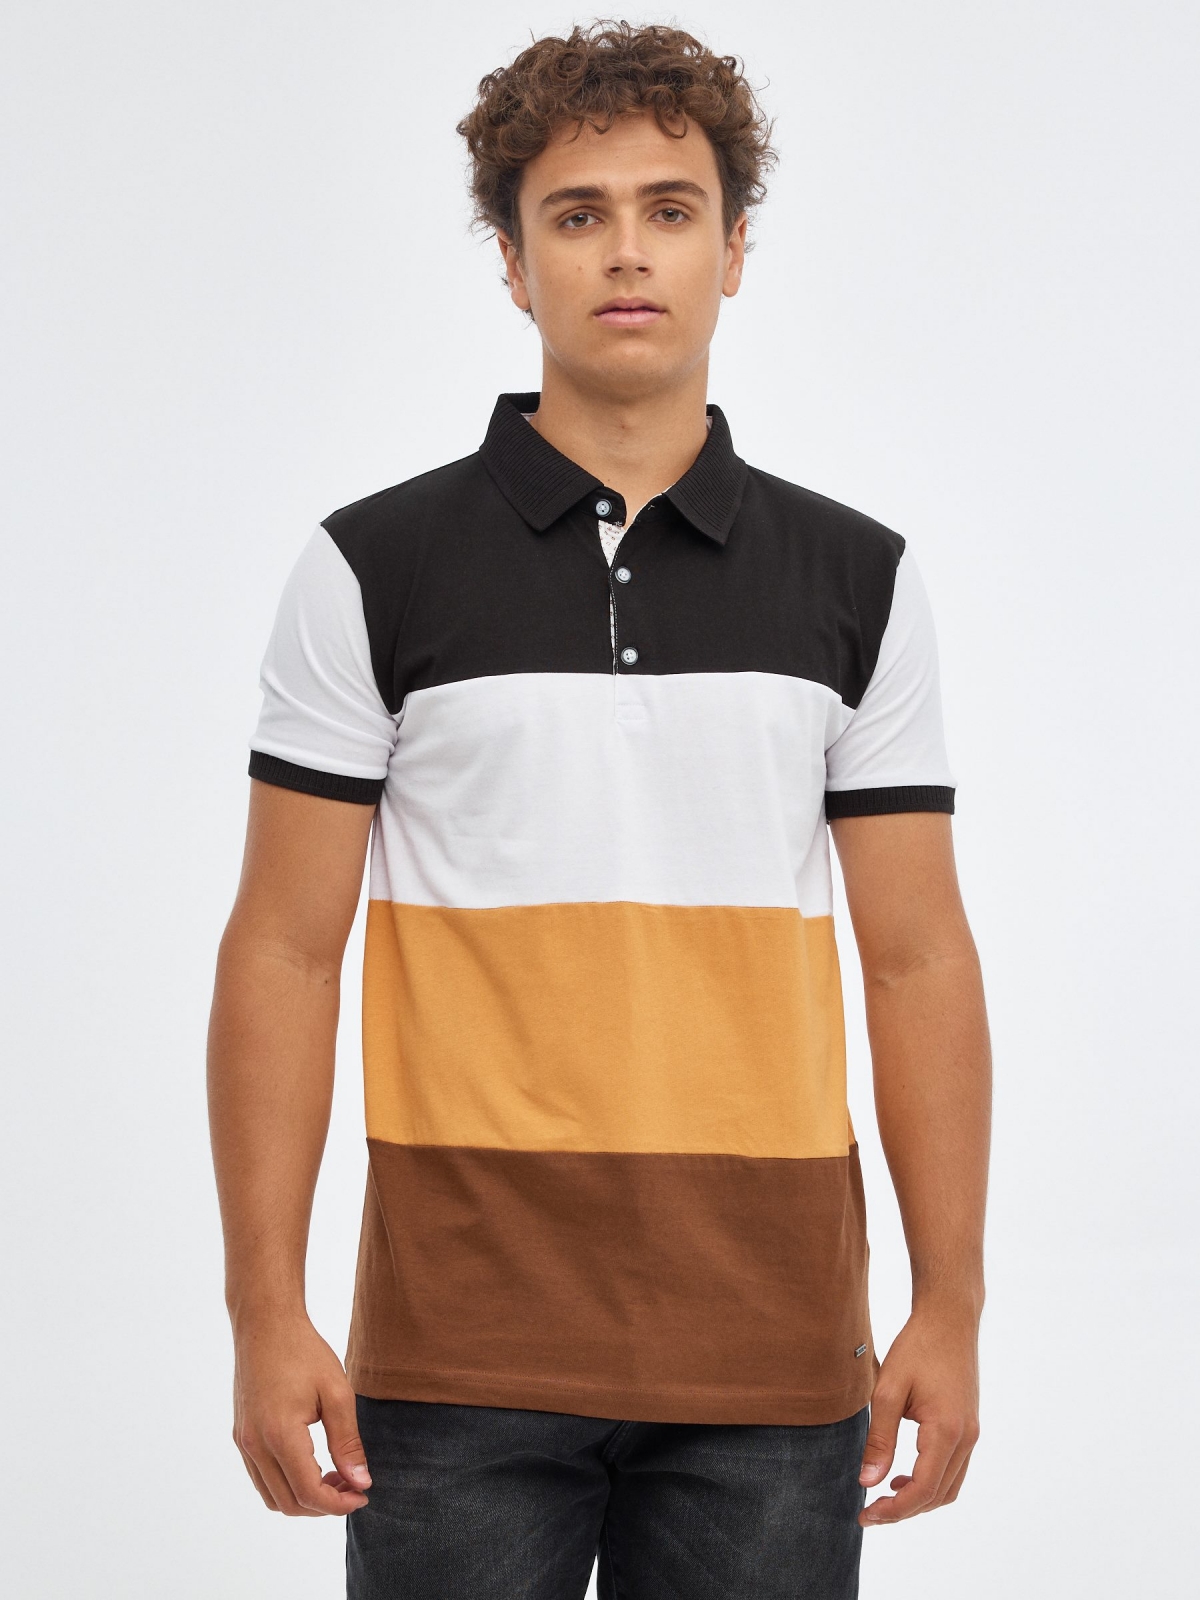 Striped polo shirt with buttons dark brown middle front view